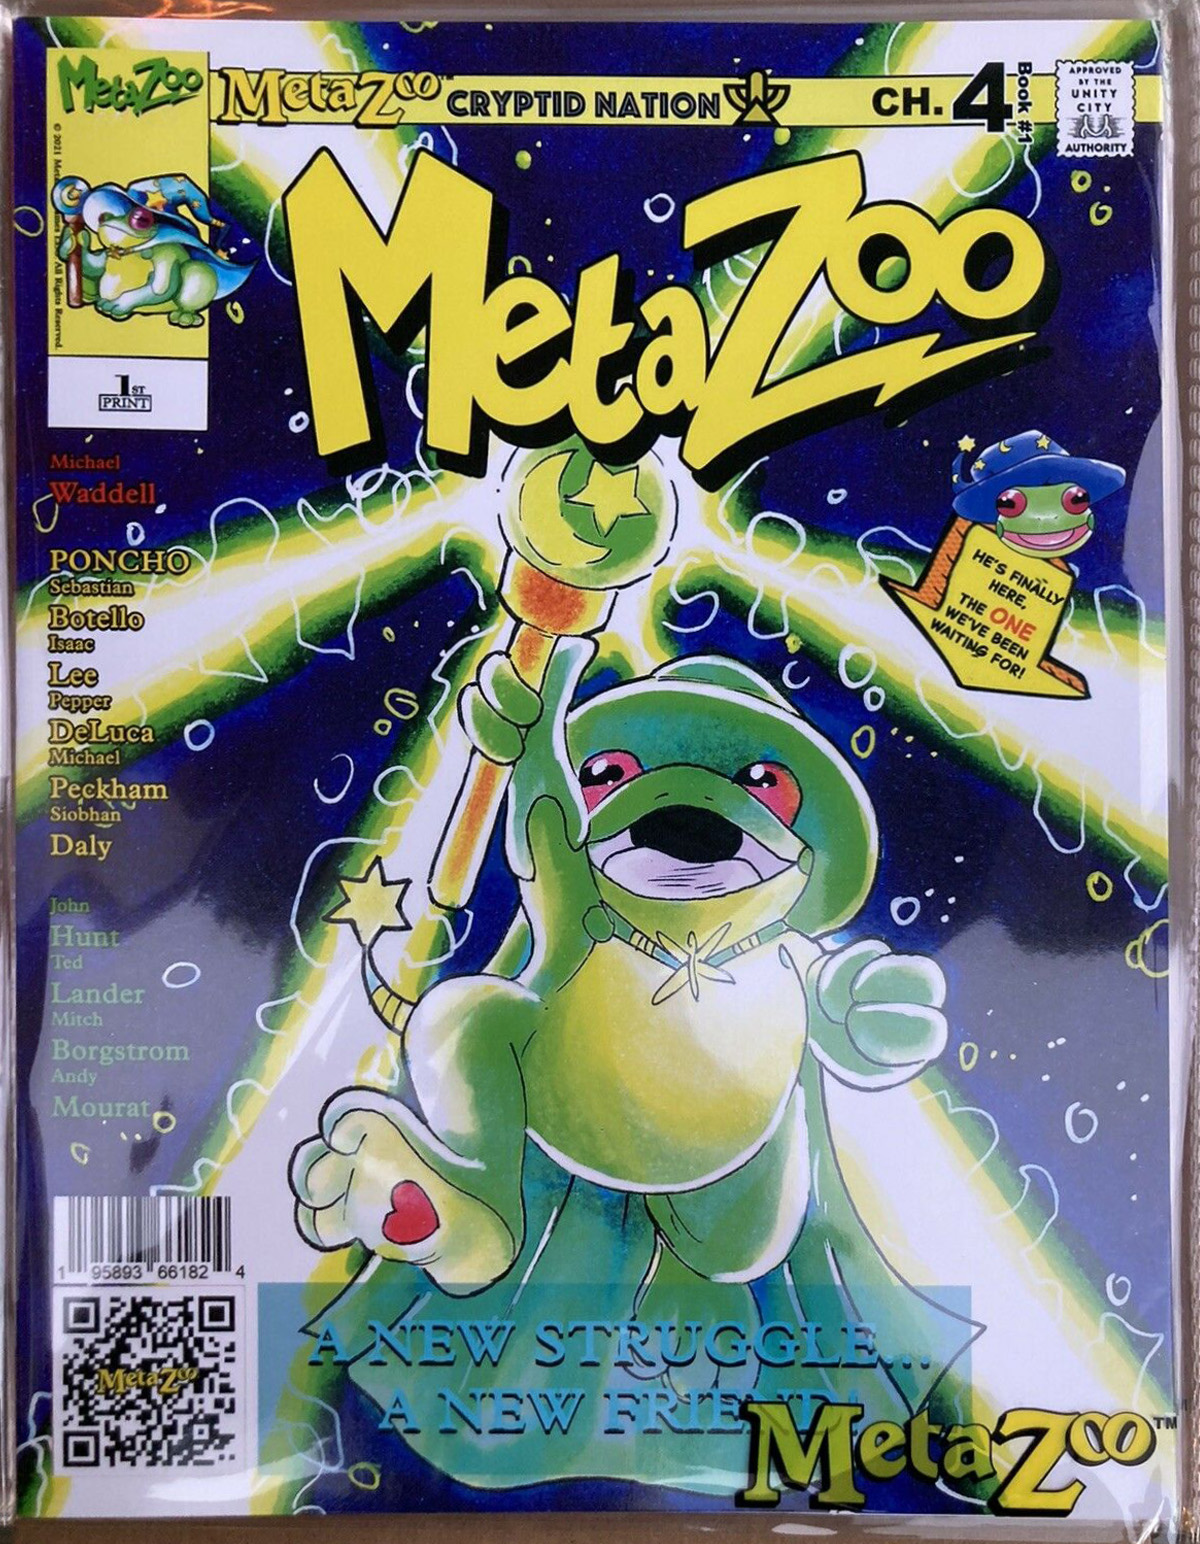 MetaZoo Illustrated Novel - Chapter 4 Print 1 - Front